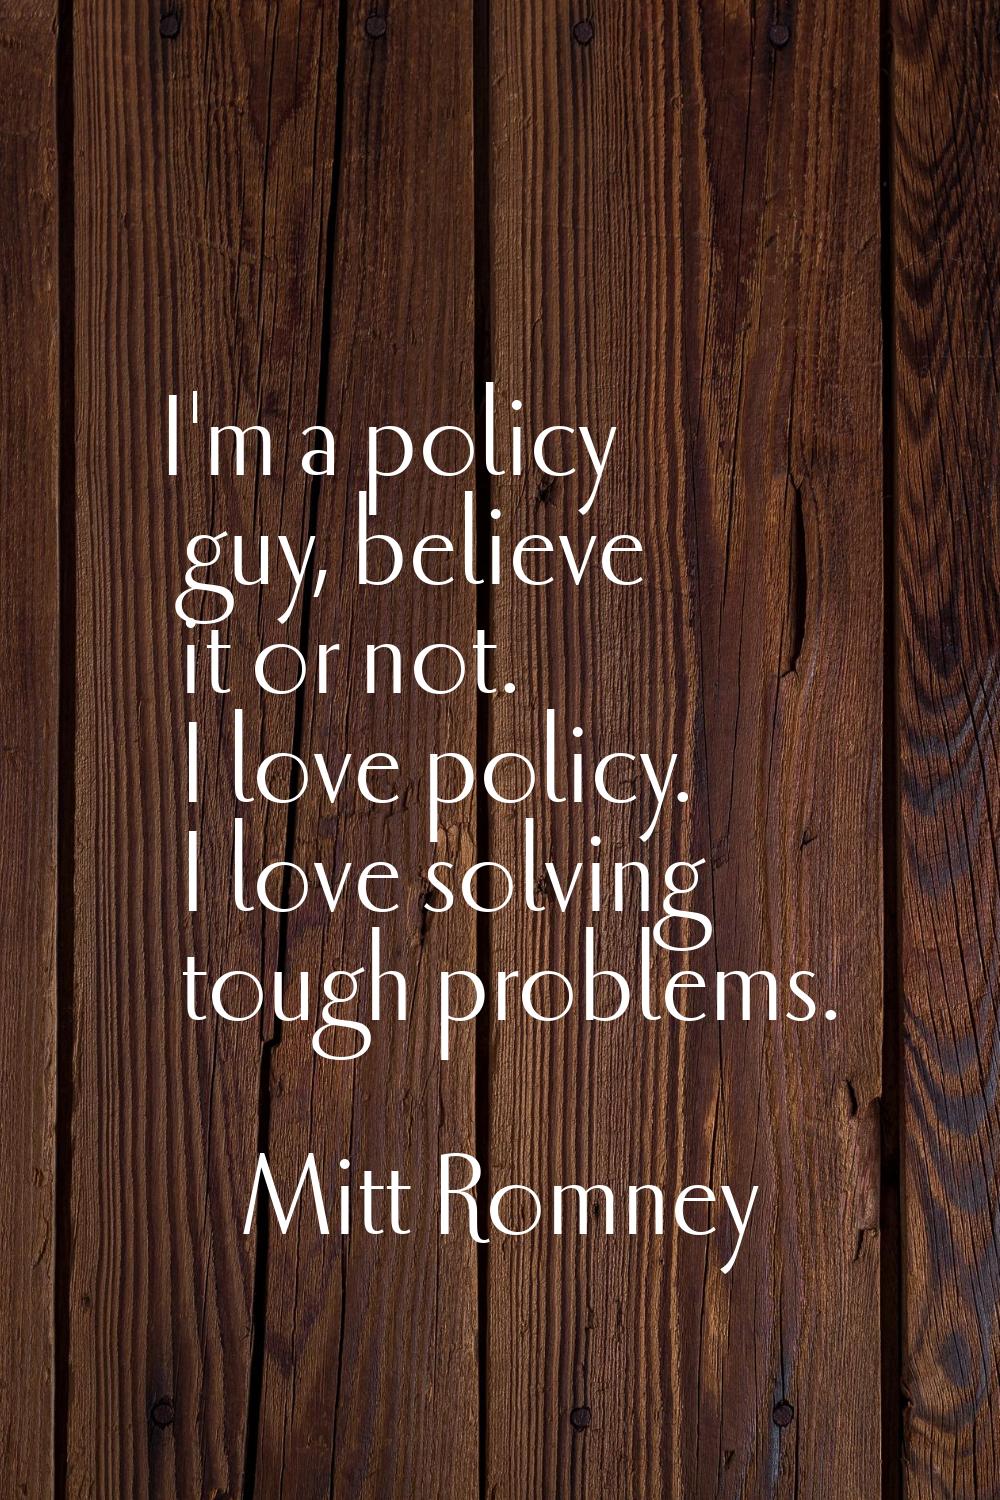 I'm a policy guy, believe it or not. I love policy. I love solving tough problems.